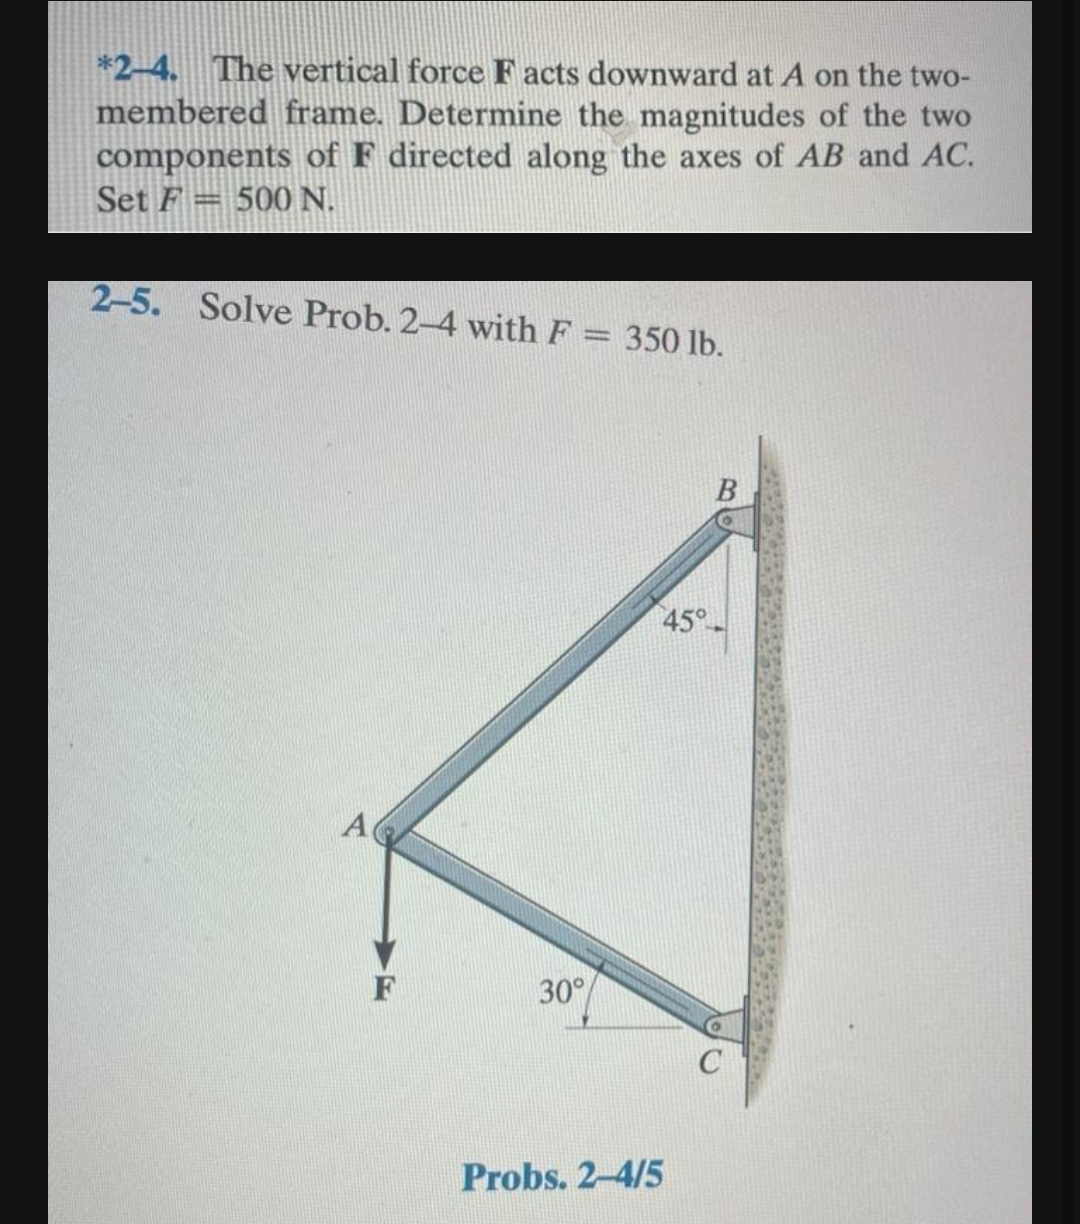 *2-4. The vertical force Facts downward at A on the two-
membered frame. Determine the magnitudes of the two
components of F directed along the axes of AB and AC.
Set F 500 N.
2-5. Solve Prob. 2-4 with F = 350 lb.
A
F
30°
45°
Probs. 2-4/5
B
C